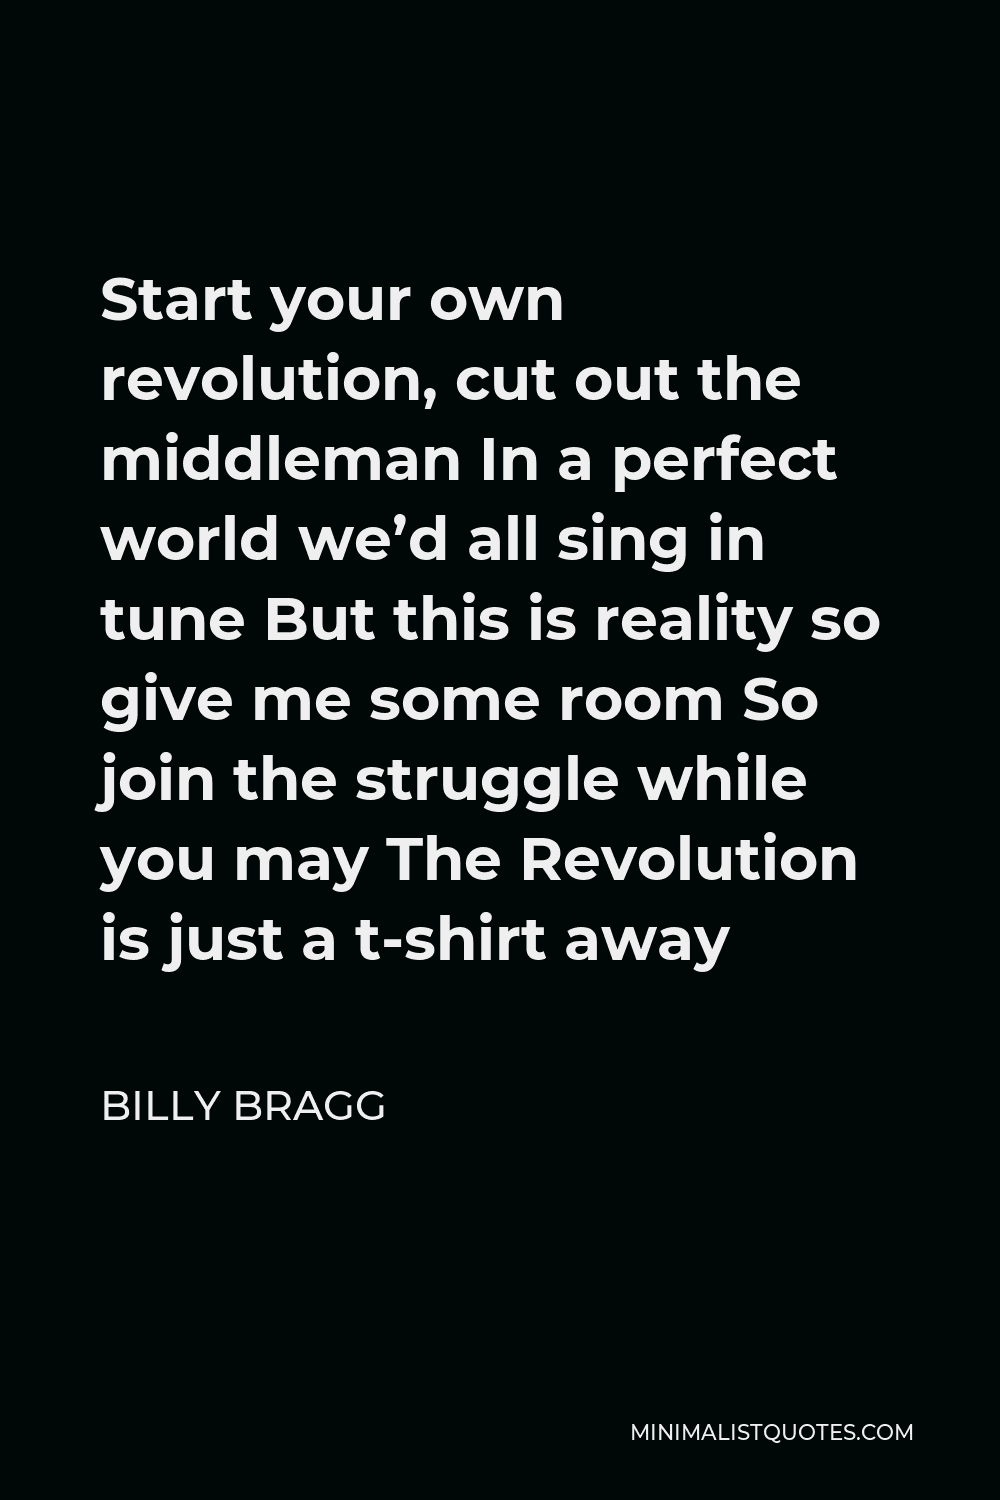 Billy Bragg Quote - Start your own revolution, cut out the middleman In a perfect world we’d all sing in tune But this is reality so give me some room So join the struggle while you may The Revolution is just a t-shirt away